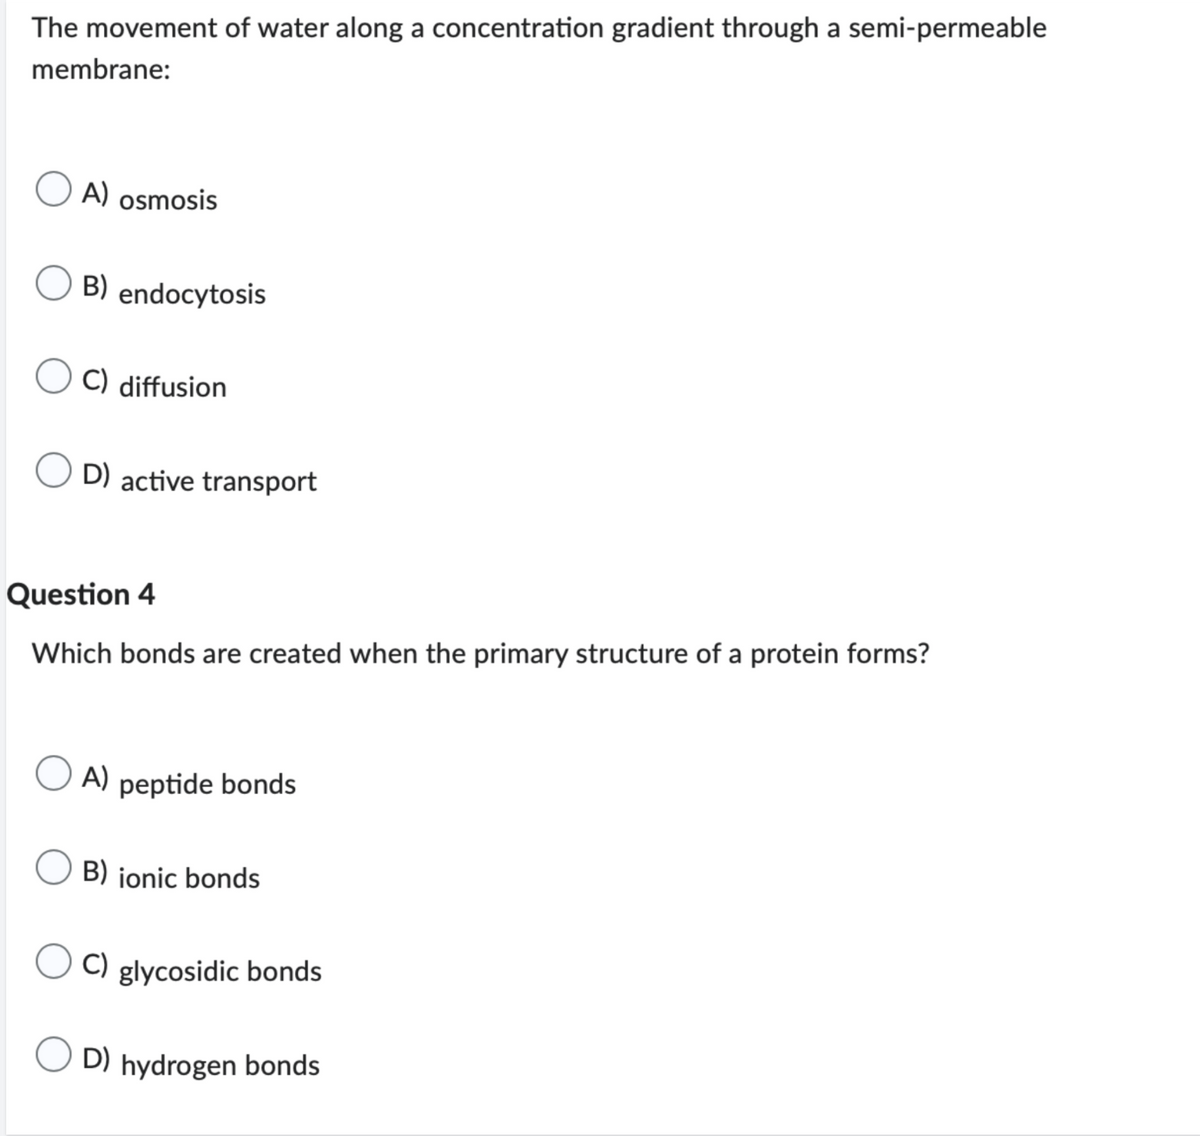 The movement of water along a concentration gradient through a semi-permeable
membrane:
A) osmosis
B) endocytosis
C) diffusion
D) active transport
Question 4
Which bonds are created when the primary structure of a protein forms?
OA)
peptide bonds
B) ionic bonds
C) glycosidic bonds
D) hydrogen bonds